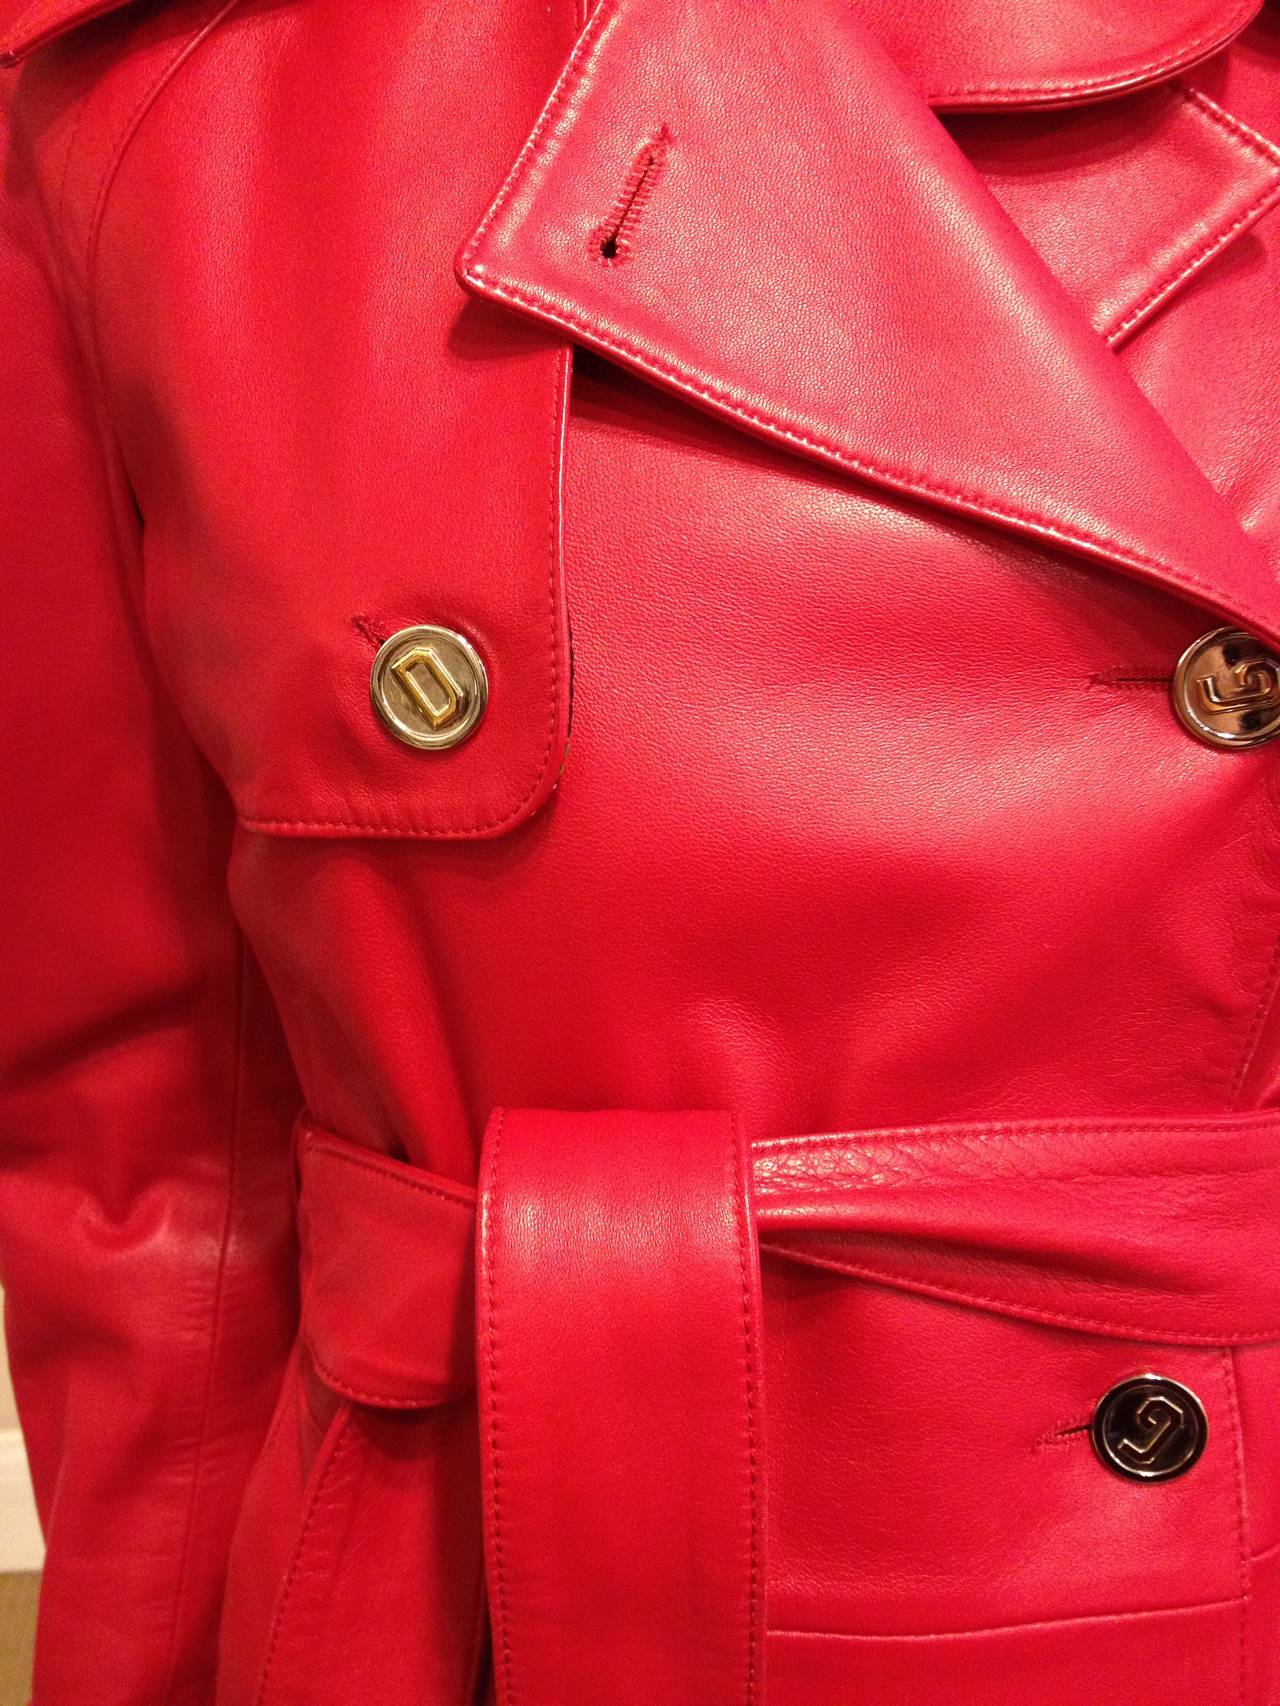 With classic gold Dolce & Gabbana buttons, this coat, in the softest red leather, is fabulous, worldly and fun. It is the perfect piece for a woman on the go that doesn't  mind to stand out. Toss this piece on with anything from wide-leg pants to a